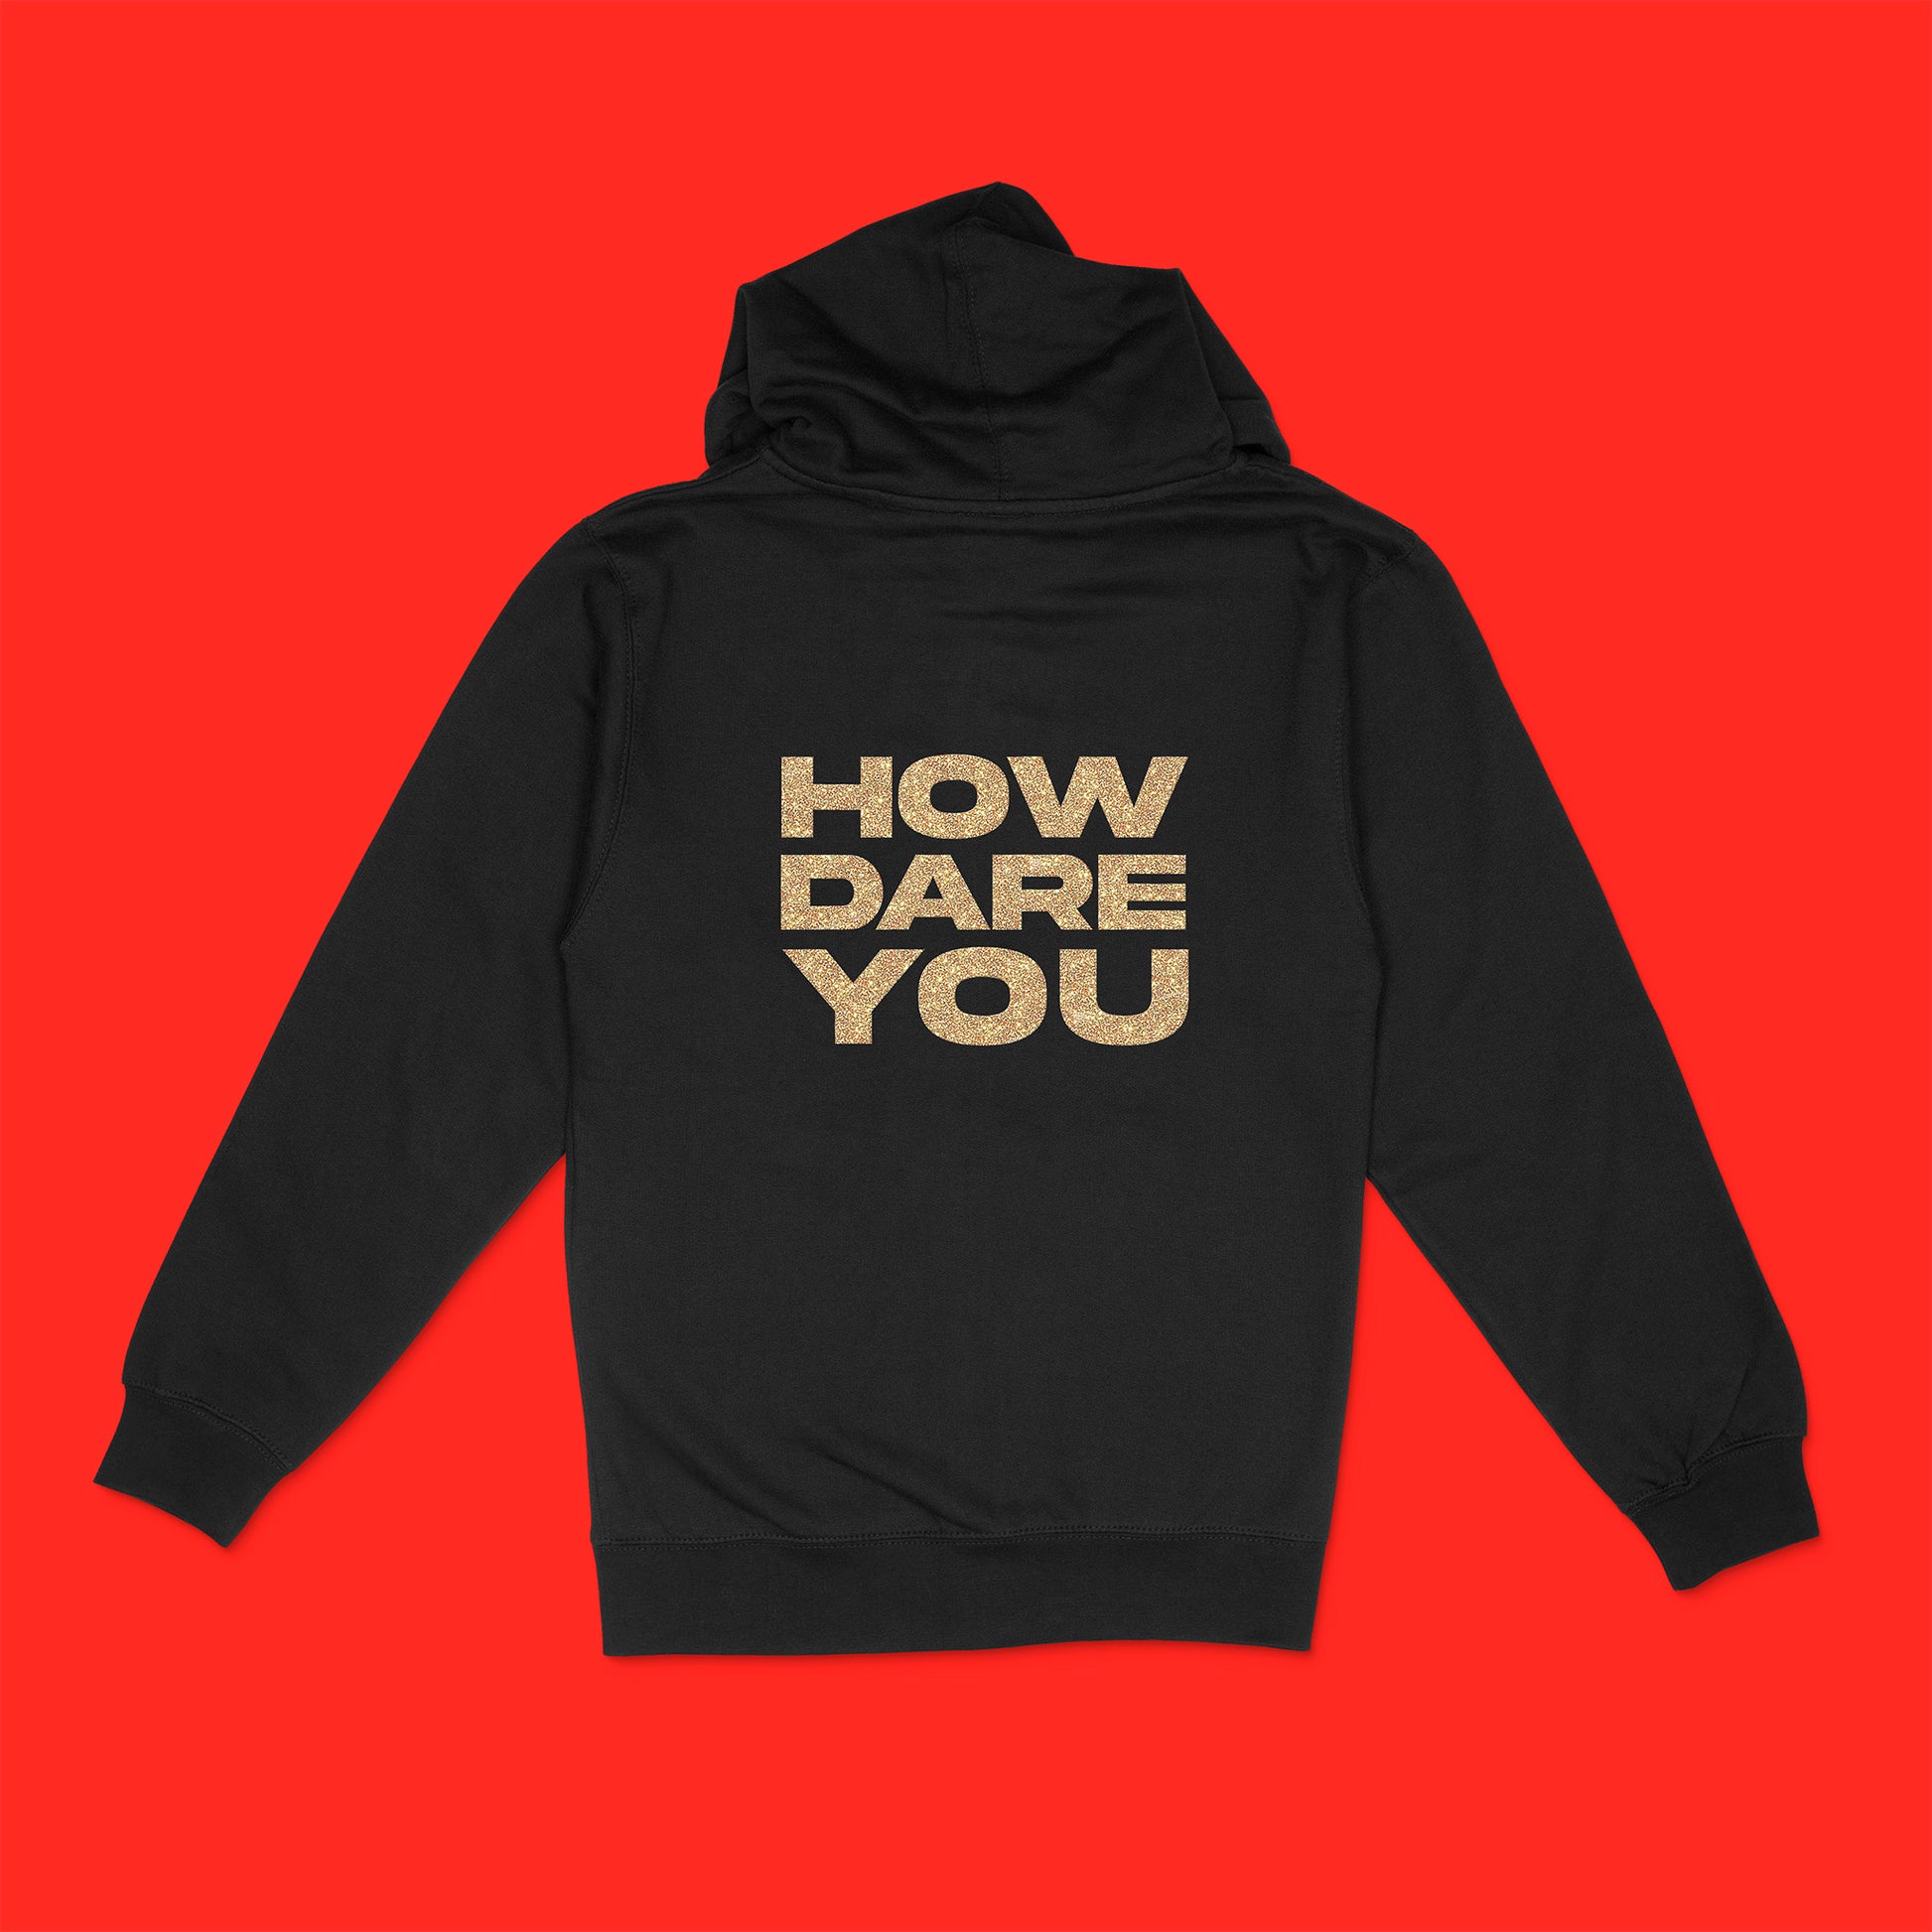 black unisex zip hoodie with custom sample text "How dare you" in gold glitter, wide text style across full back of garment